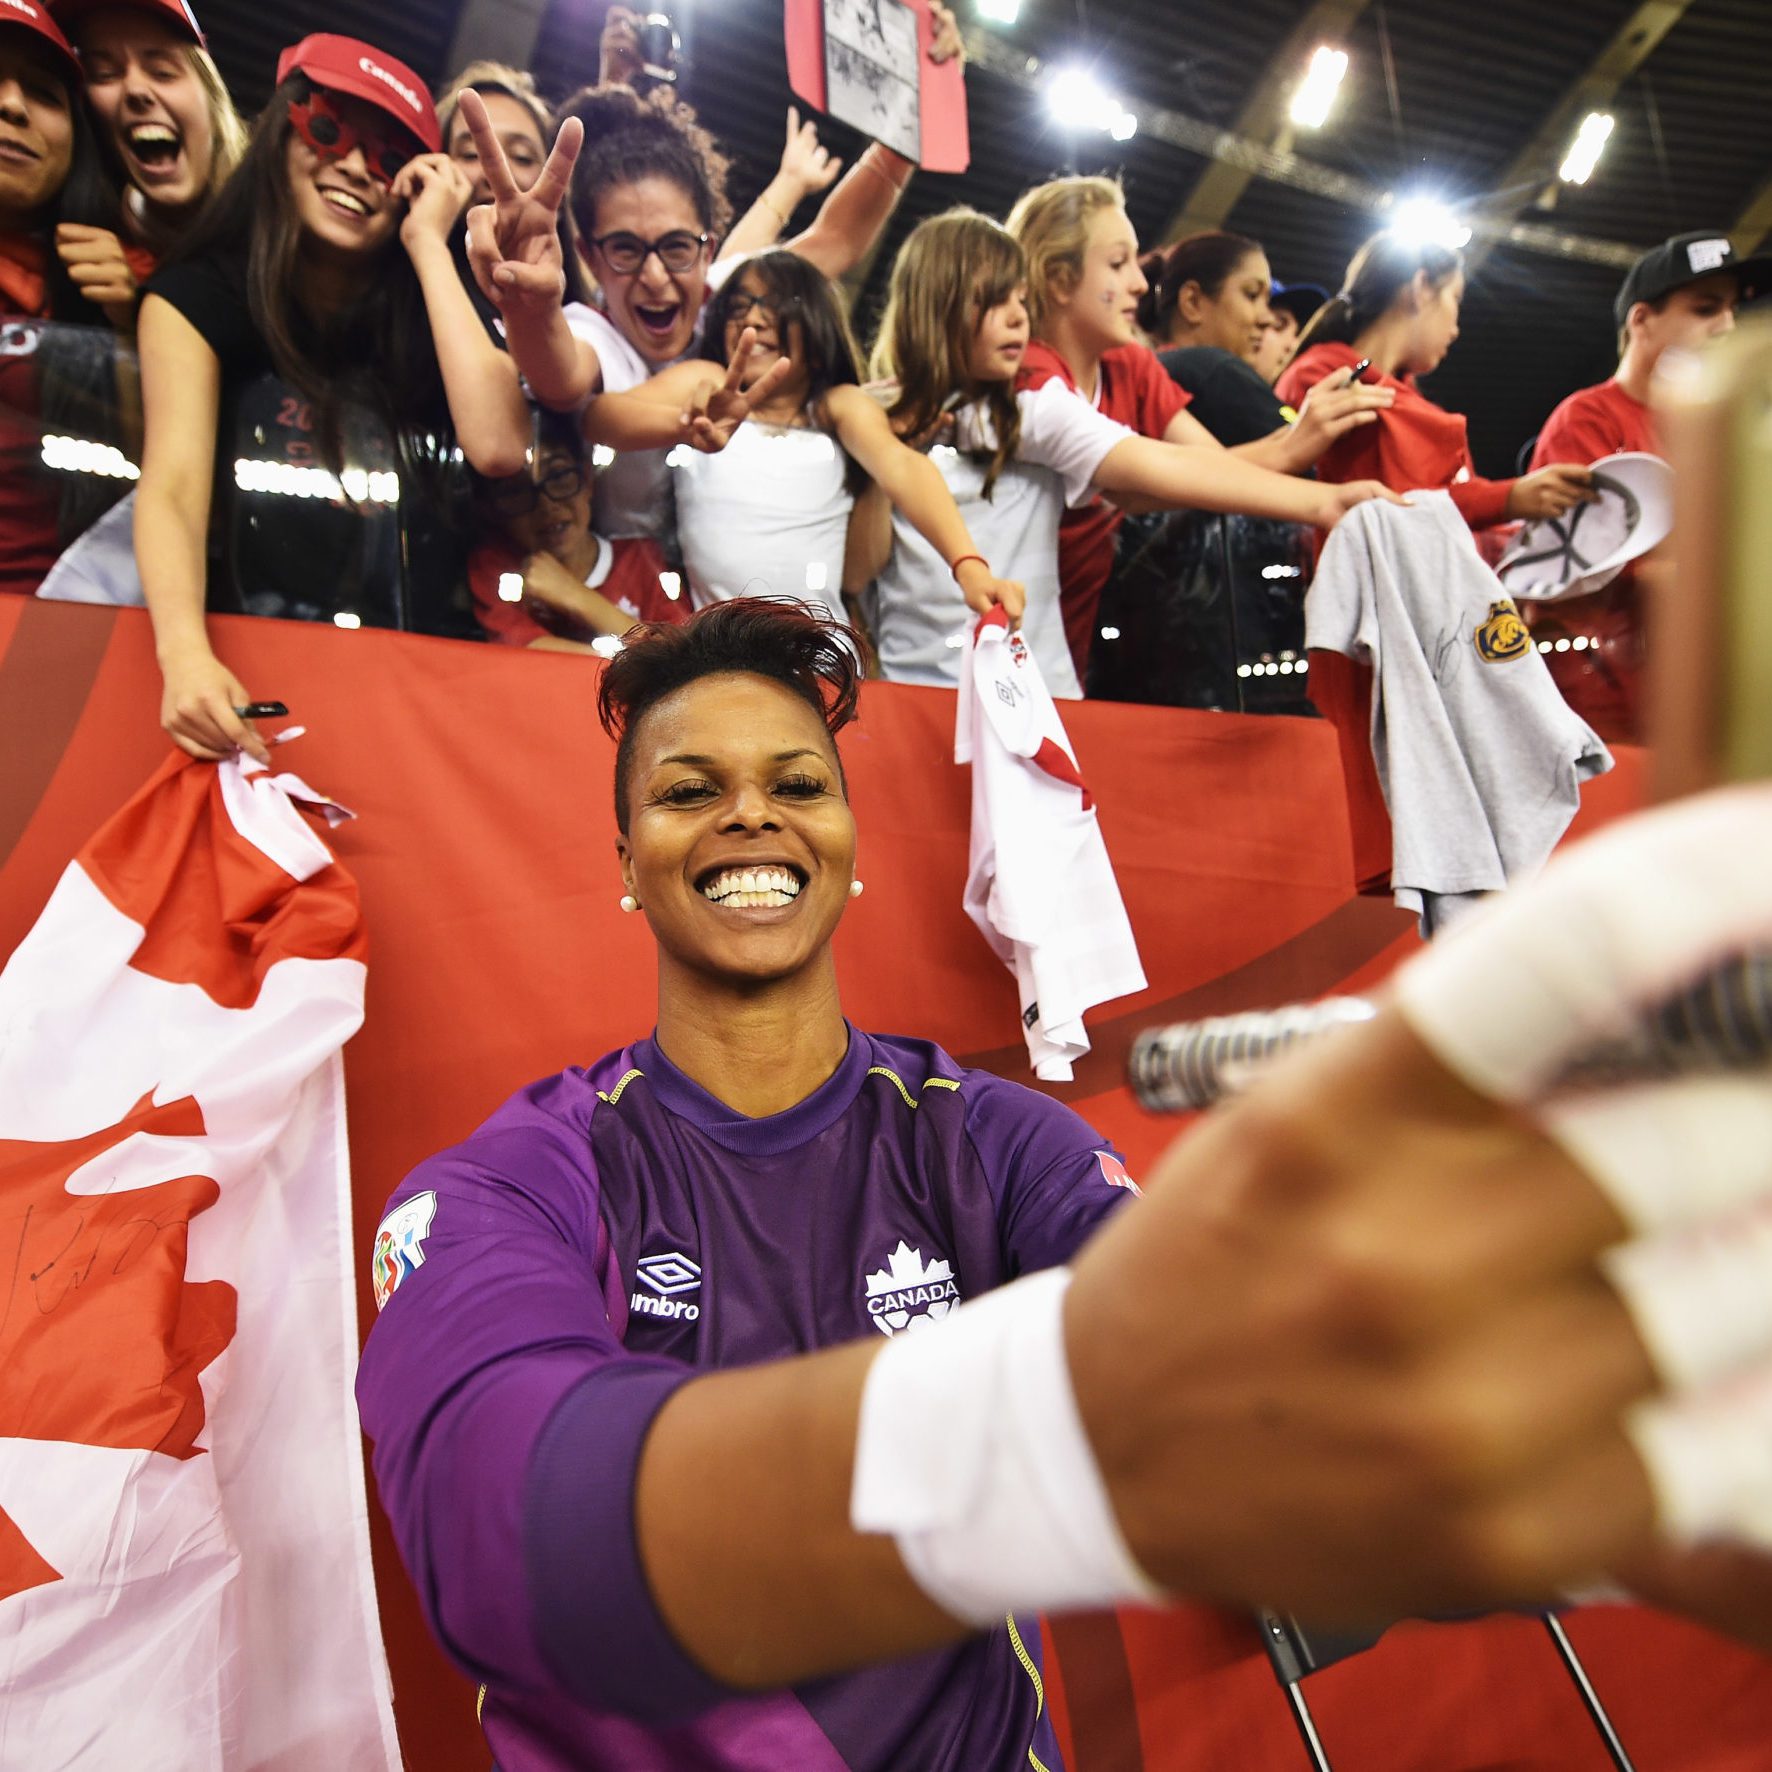 MONTREAL, QC - JUNE 15:  Karina LeBlanc of Canada celebrates with fans at the end of the FIFA Women's World Cup Group A match between Netherlands and Canada at Olympic Stadium on June 15, 2015 in Montreal, Canada.  (Photo by Stuart Franklin - FIFA/FIFA via Getty Images)